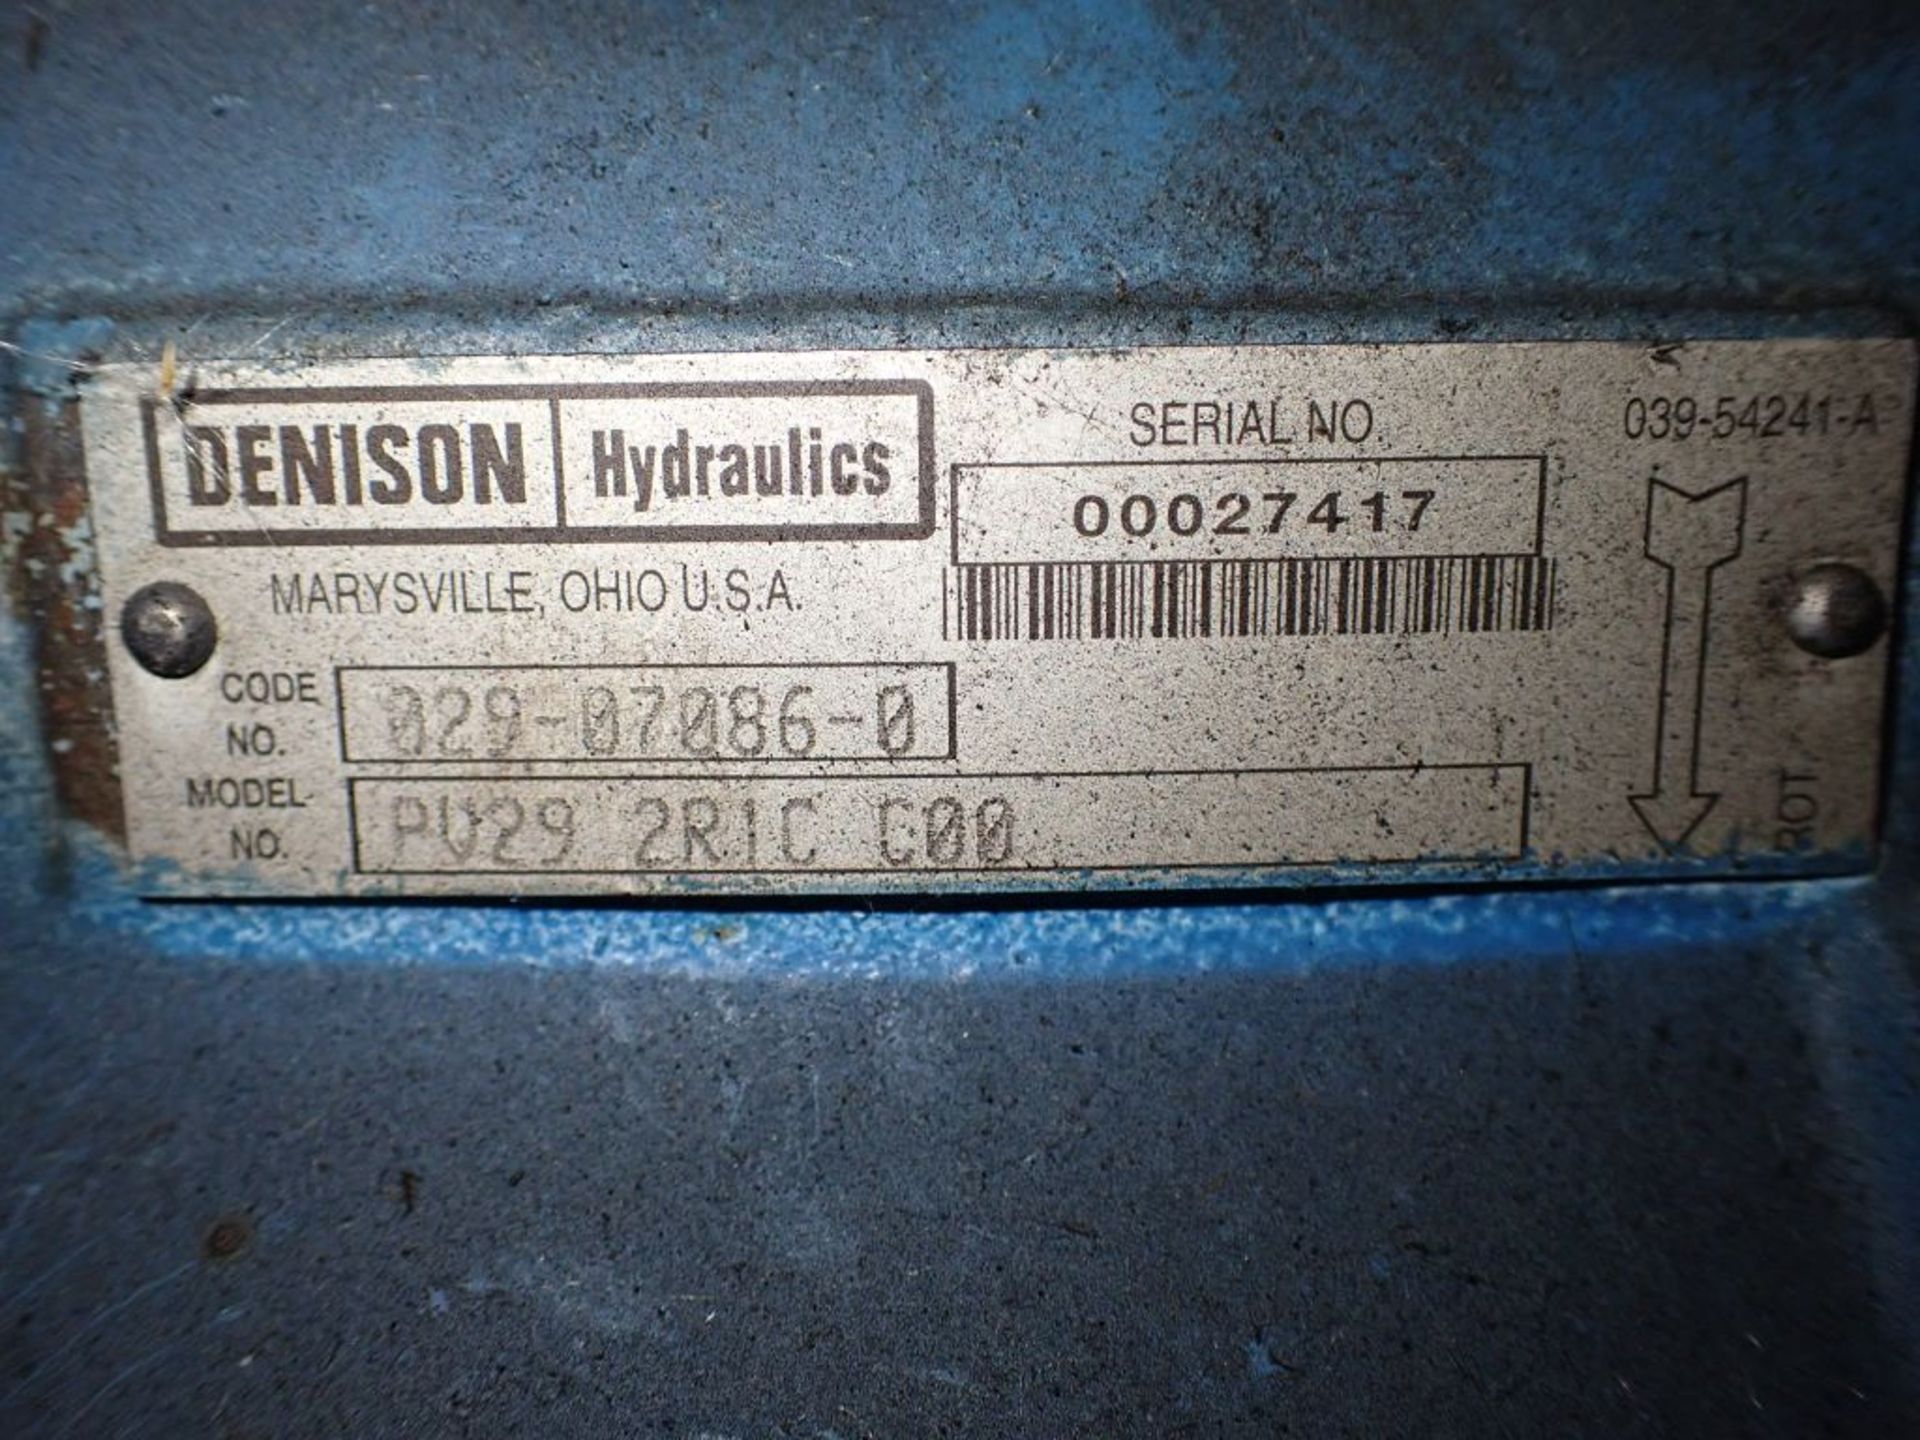 Denison Hydraulic Pump System | Model No. PV29-2R1C-C00; Code No. 029-070 86-0; Includes:; - Image 9 of 14